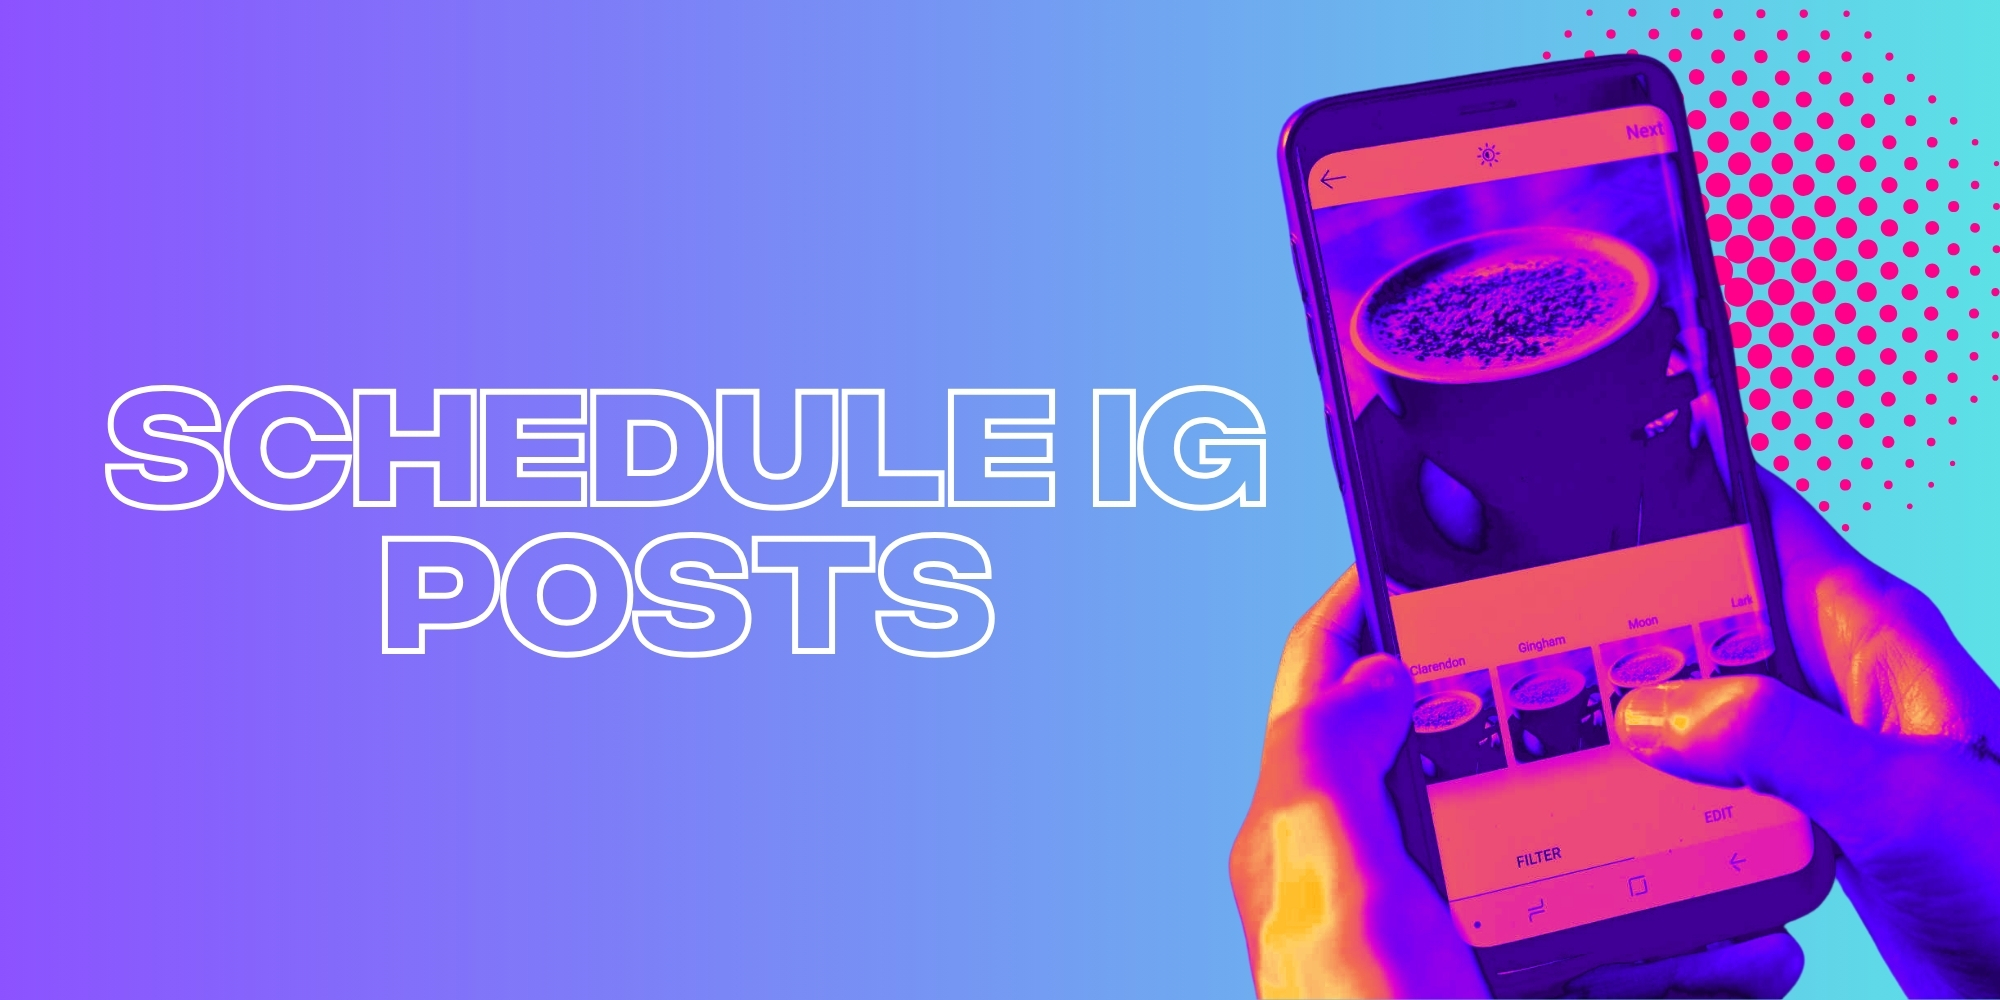 How to Schedule Instagram Posts: A Simple Step-By-Step Guide